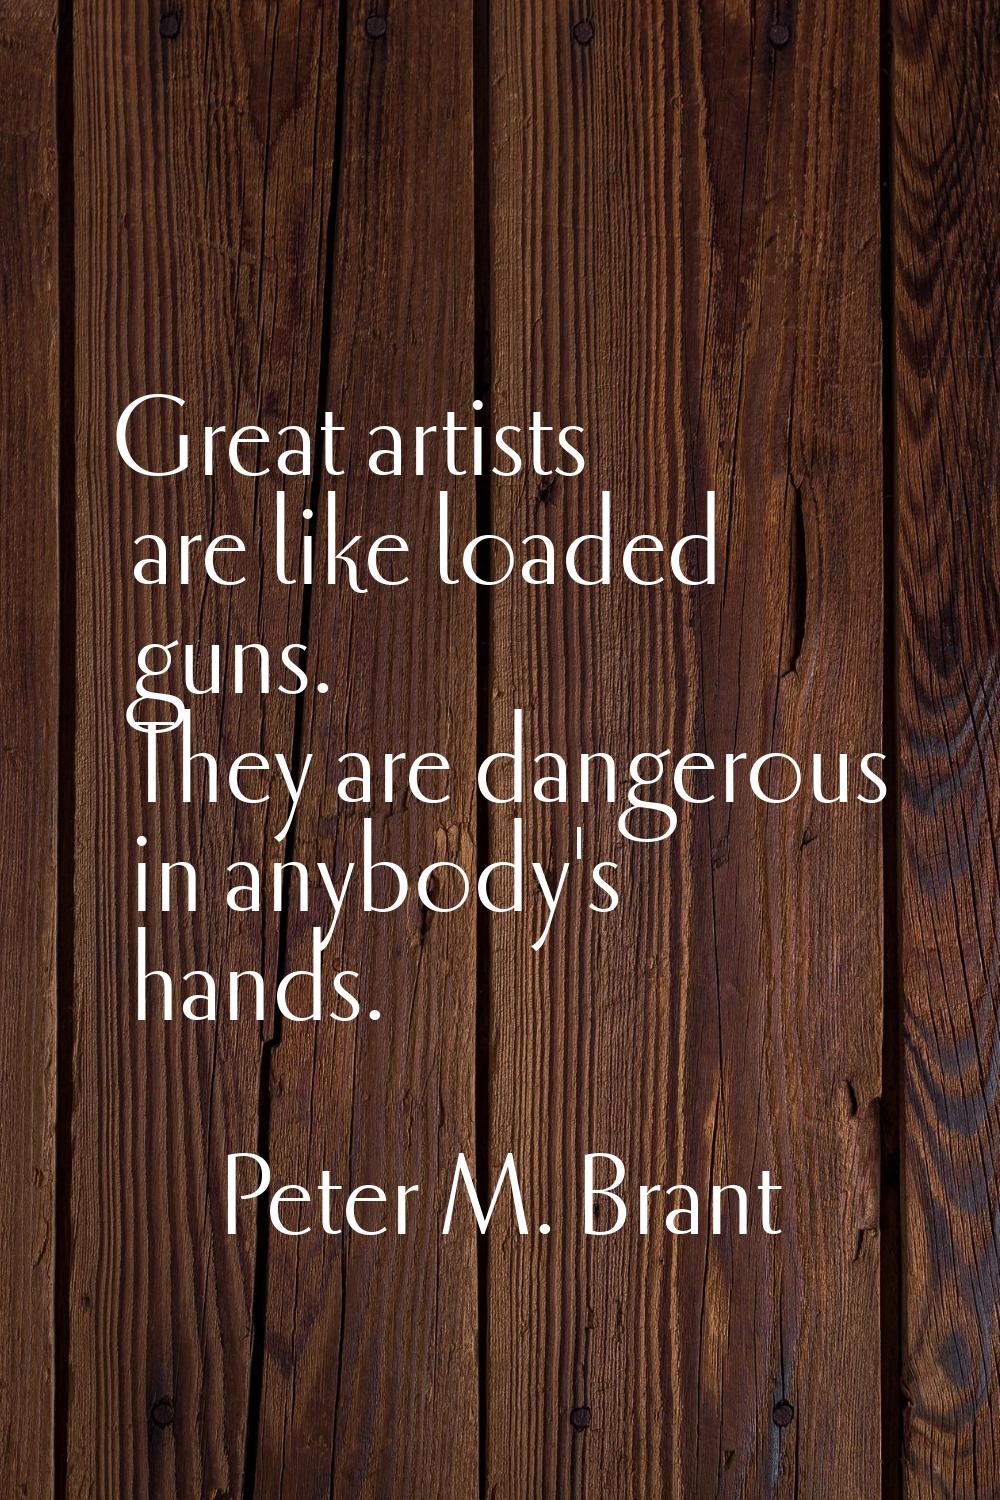 Great artists are like loaded guns. They are dangerous in anybody's hands.